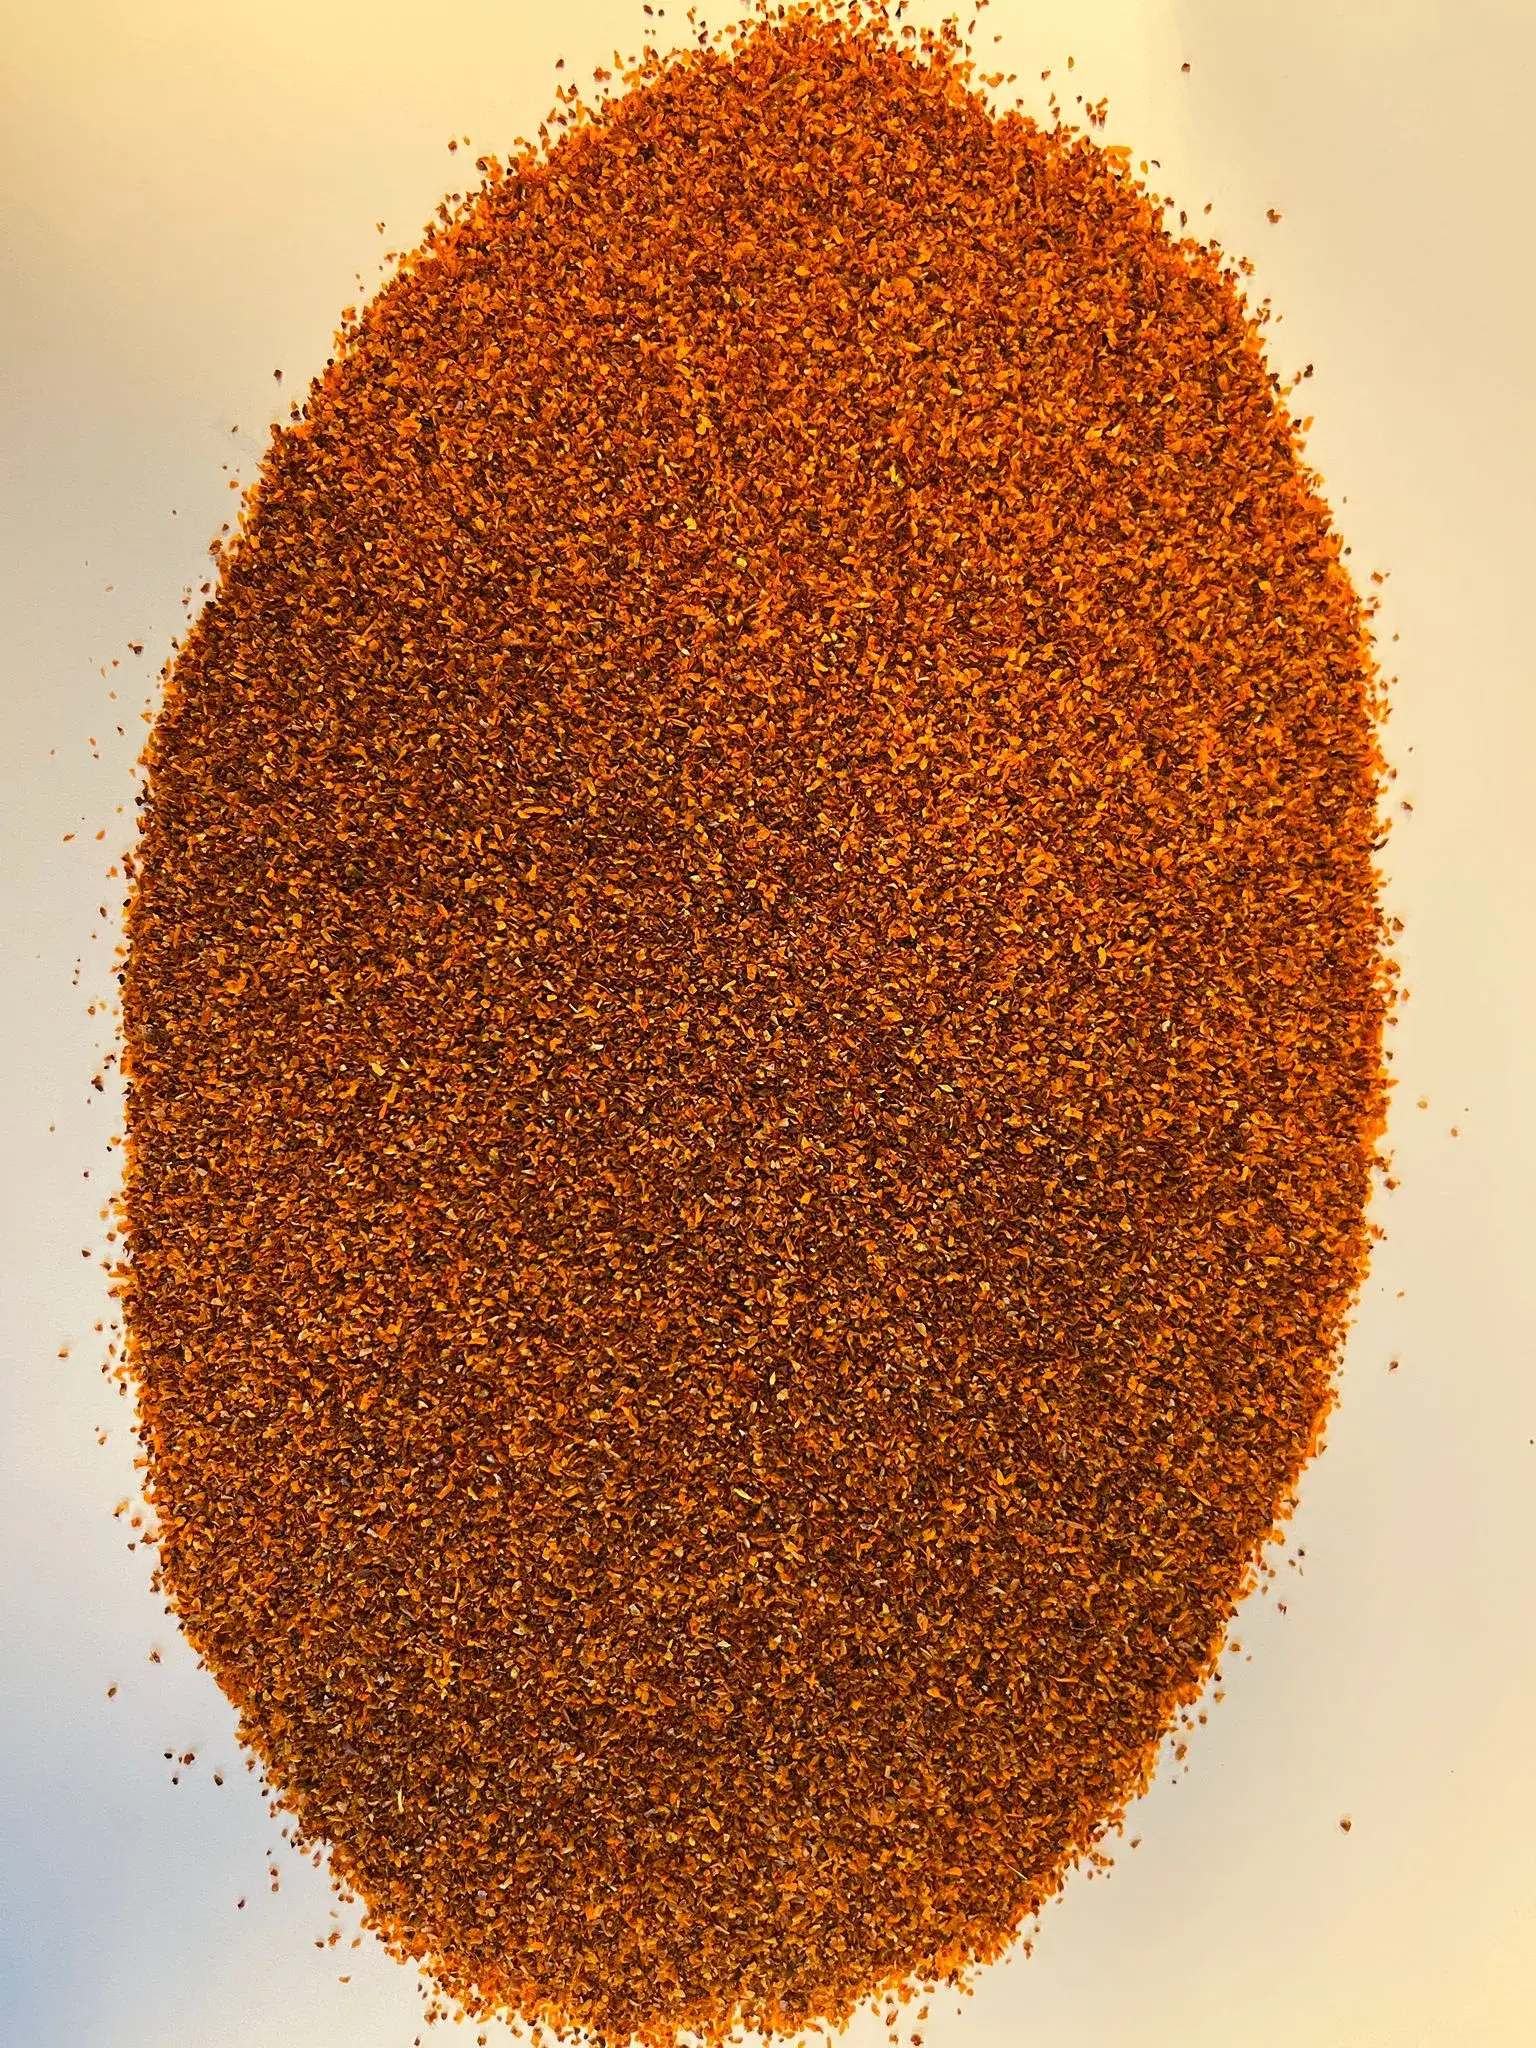 Dried Tomato product image